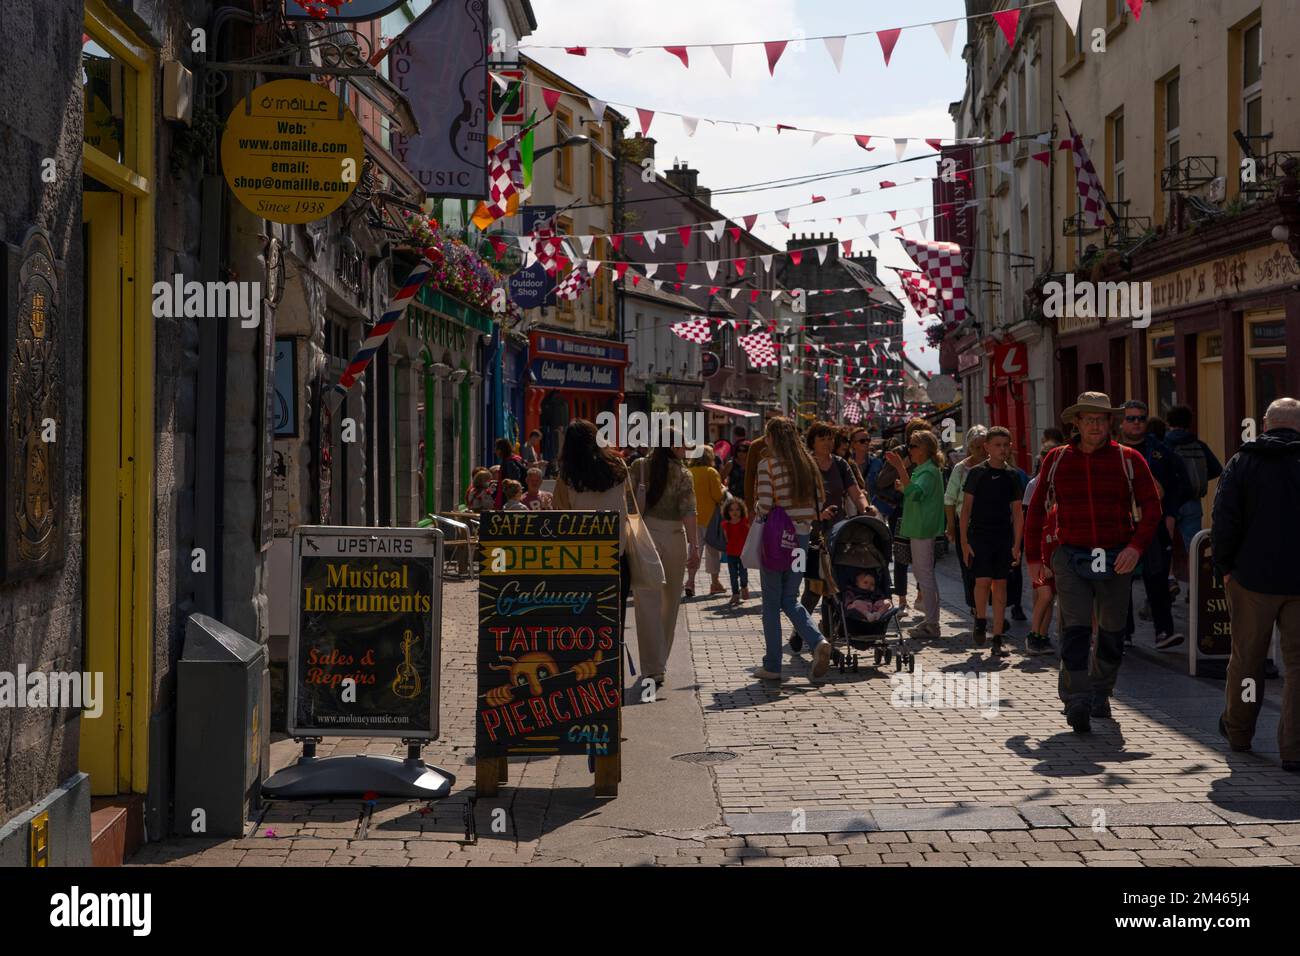 Quay Street and High Street pedestianised area in Galway City, Ireland Stock Photo